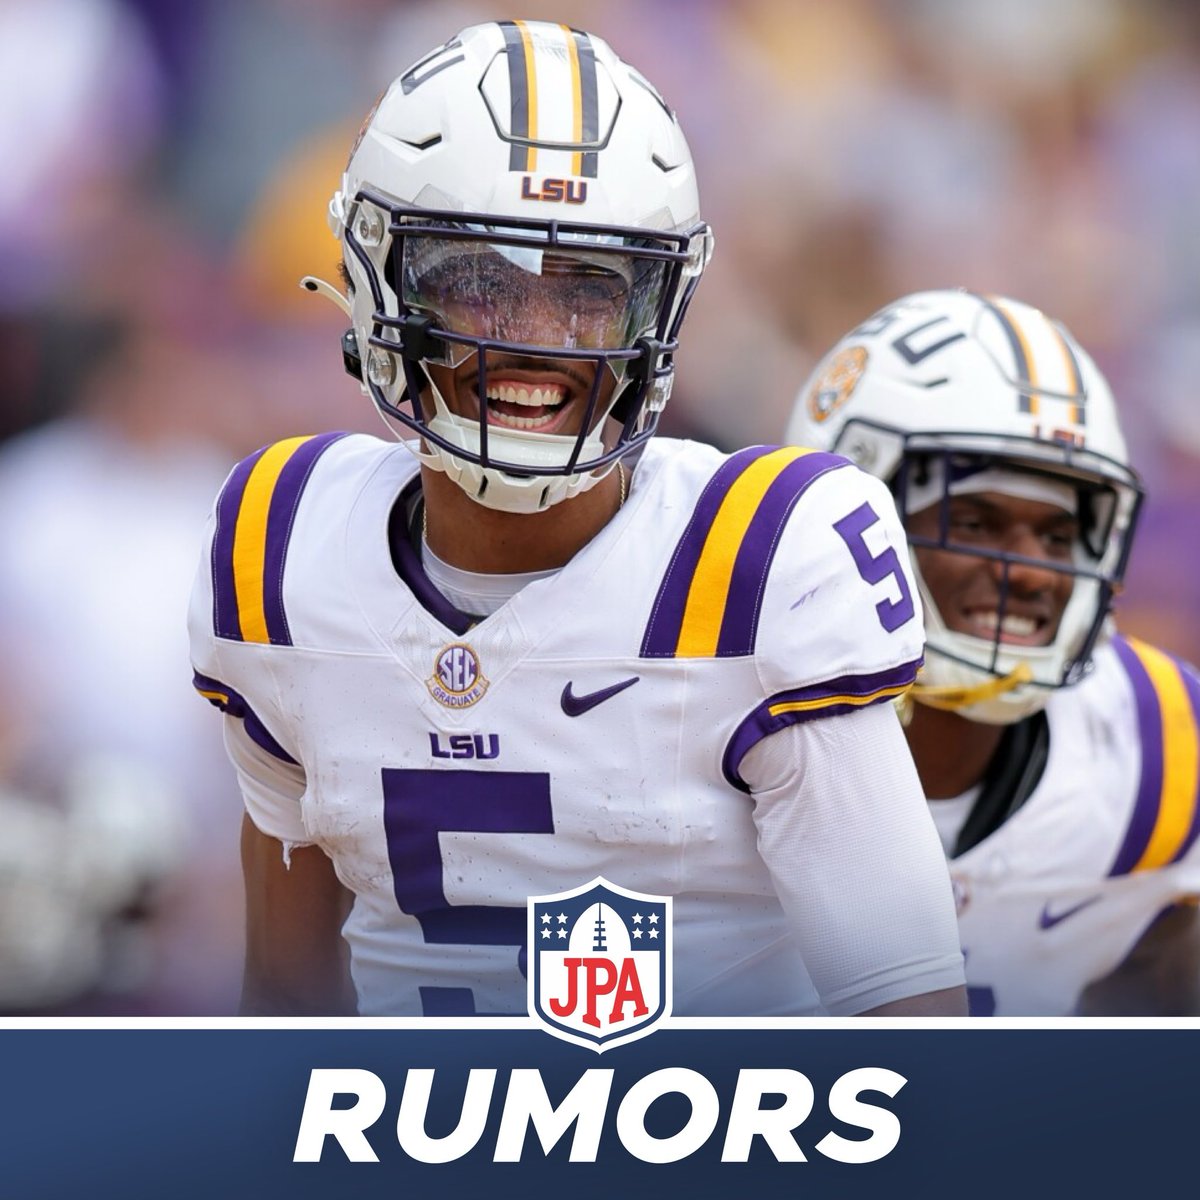 𝗥𝗨𝗠𝗢𝗥𝗦: Jayden Daniels is “cool” with going to the #Commanders but his dream would be going to the #Raiders or #Vikings, says @DMRussini “While the QB is “cool” with Washington, I’m told in his “dream world” he would reunite with Raiders coach Antonio Pierce (who was an